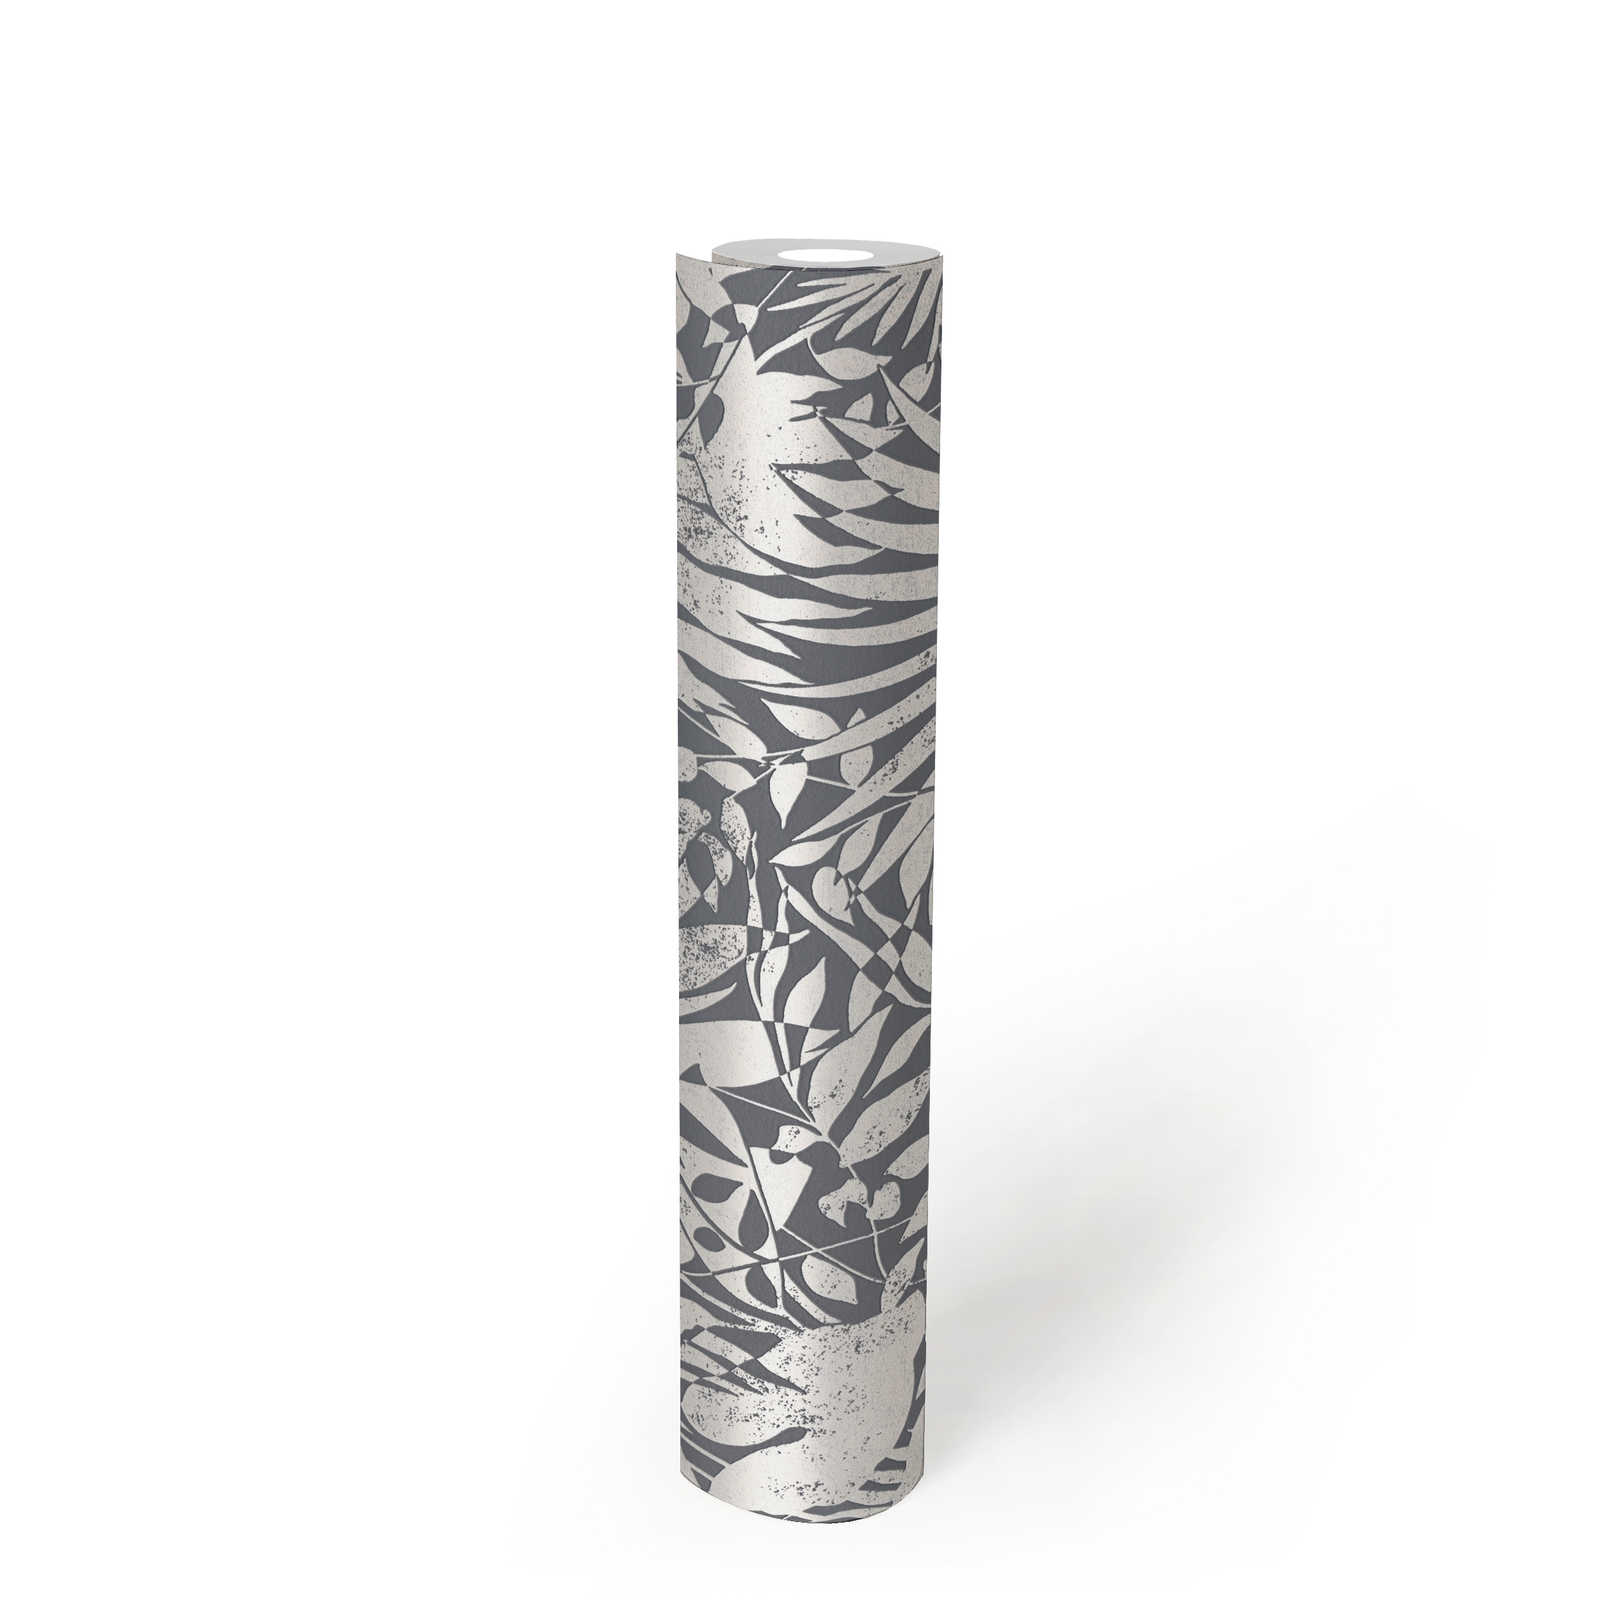             Silver wallpaper with leaves design and texture effect
        